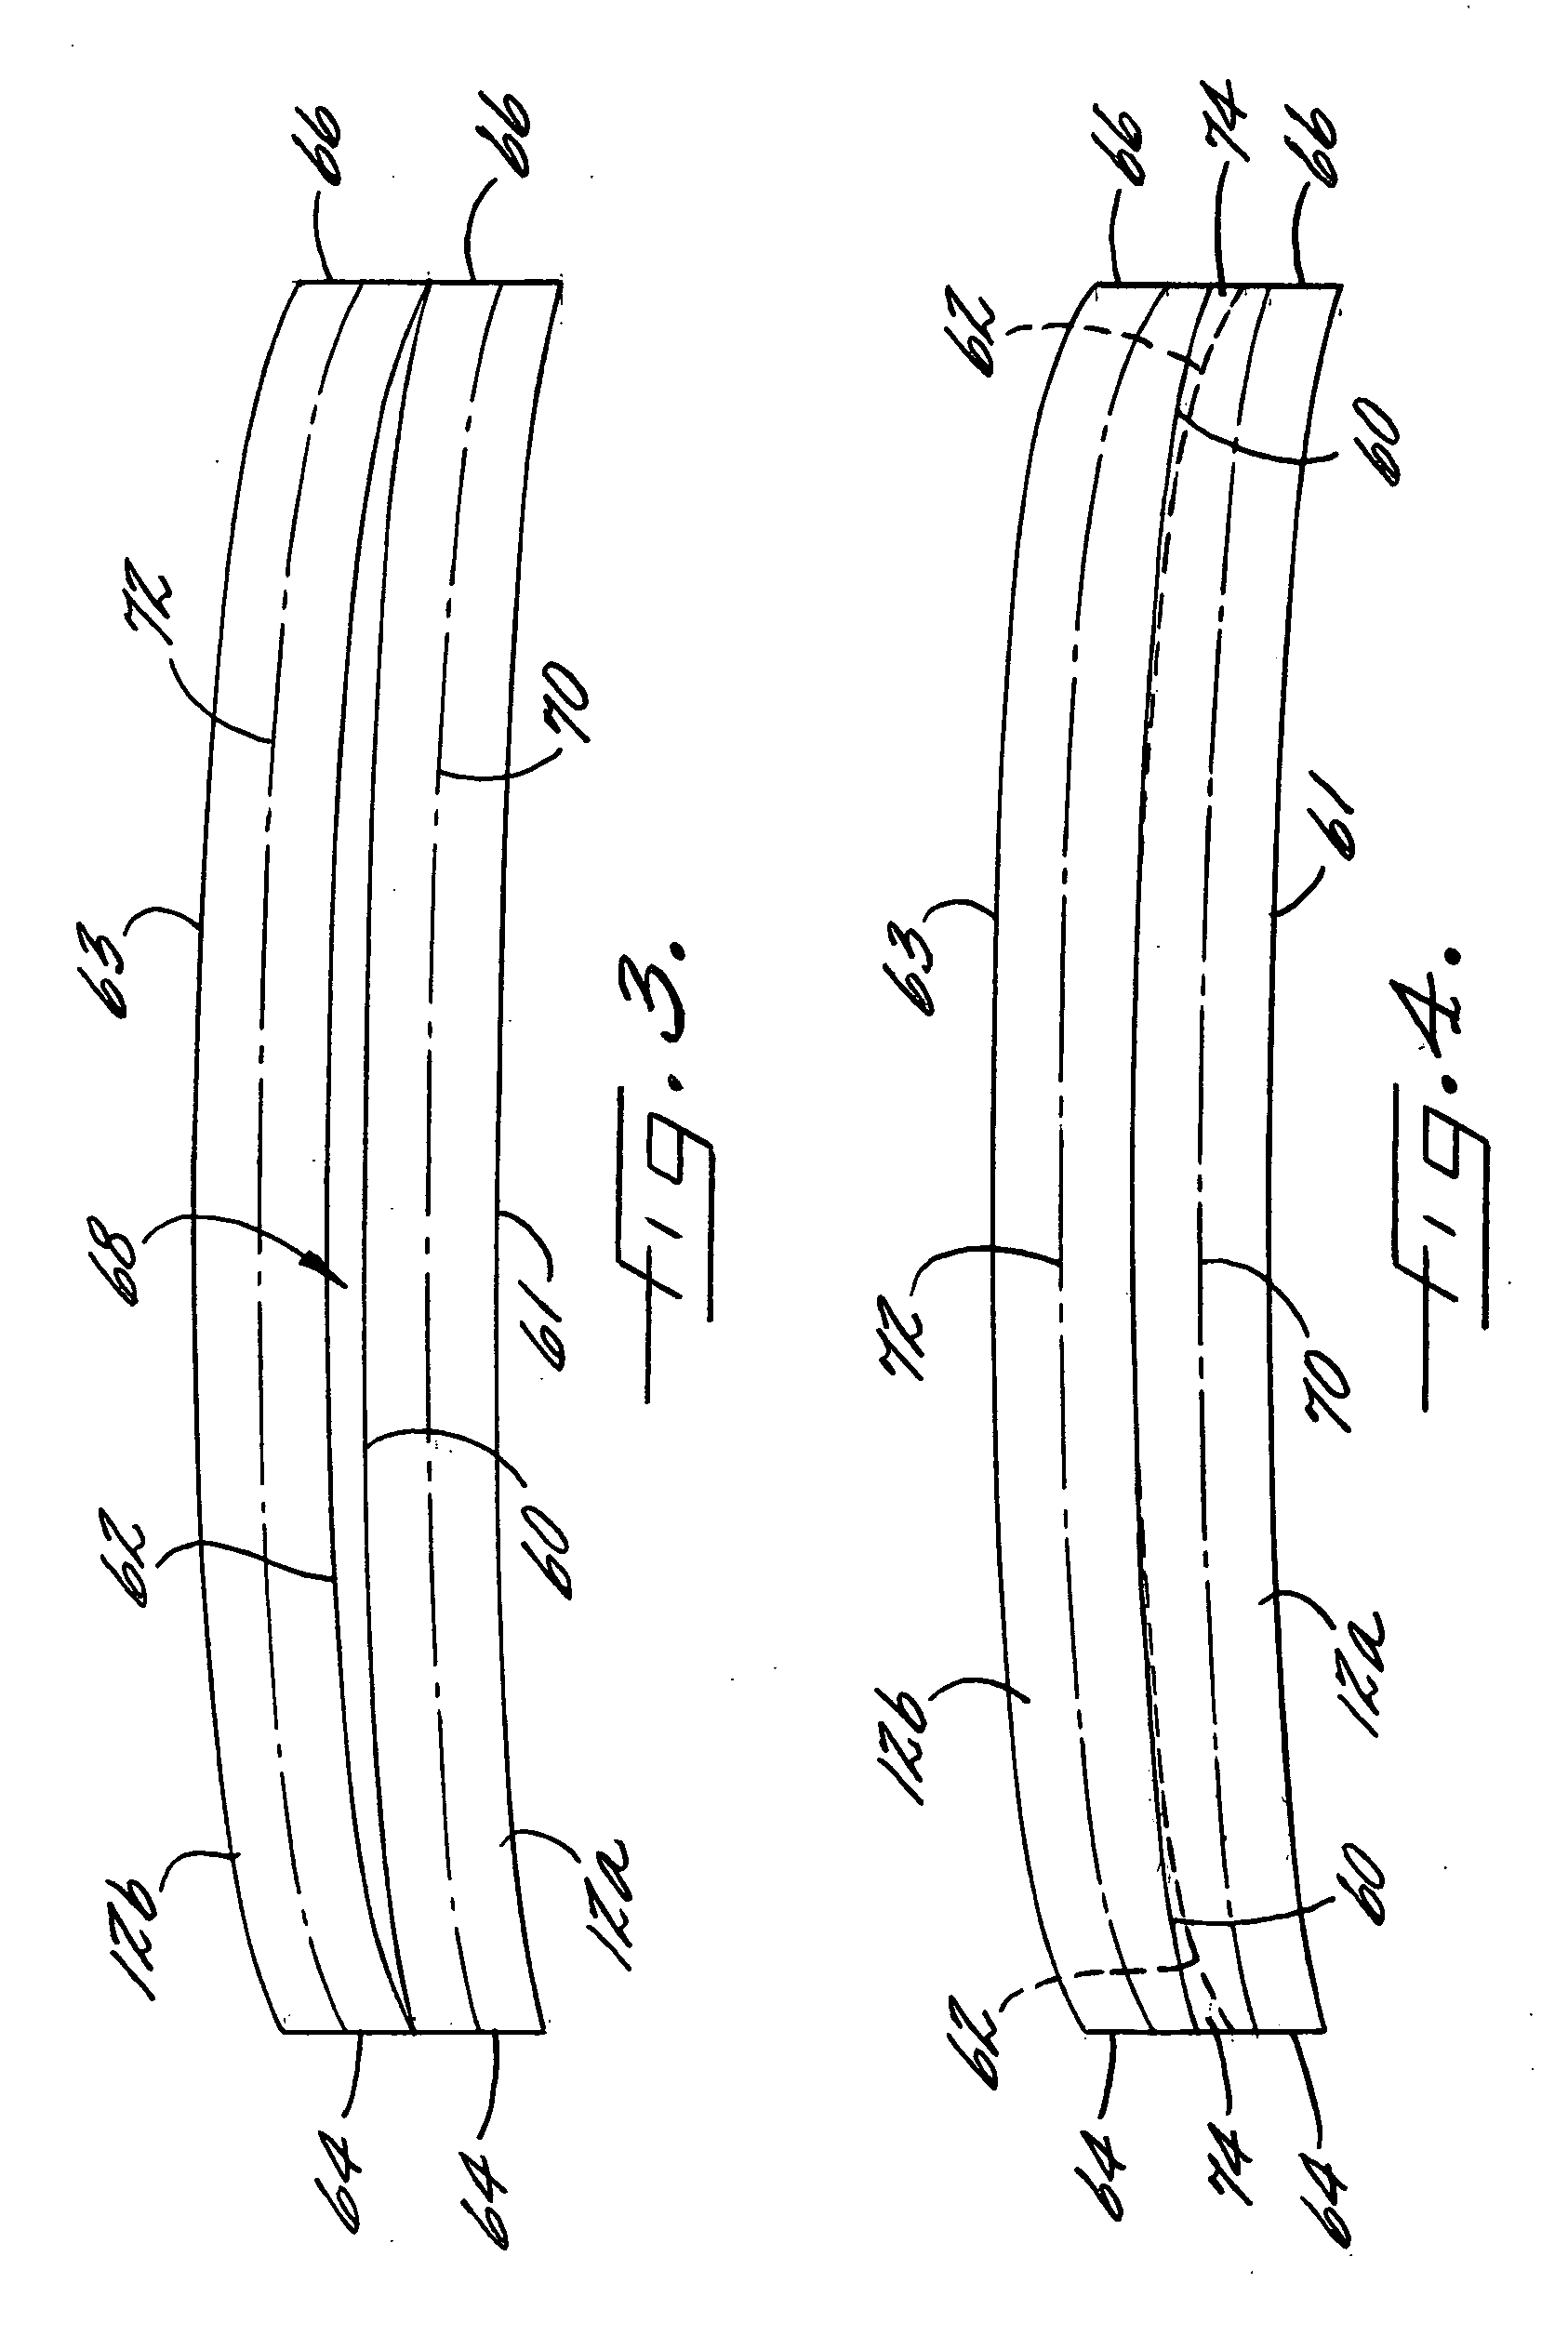 Apparatus and method for composite tape profile cutting